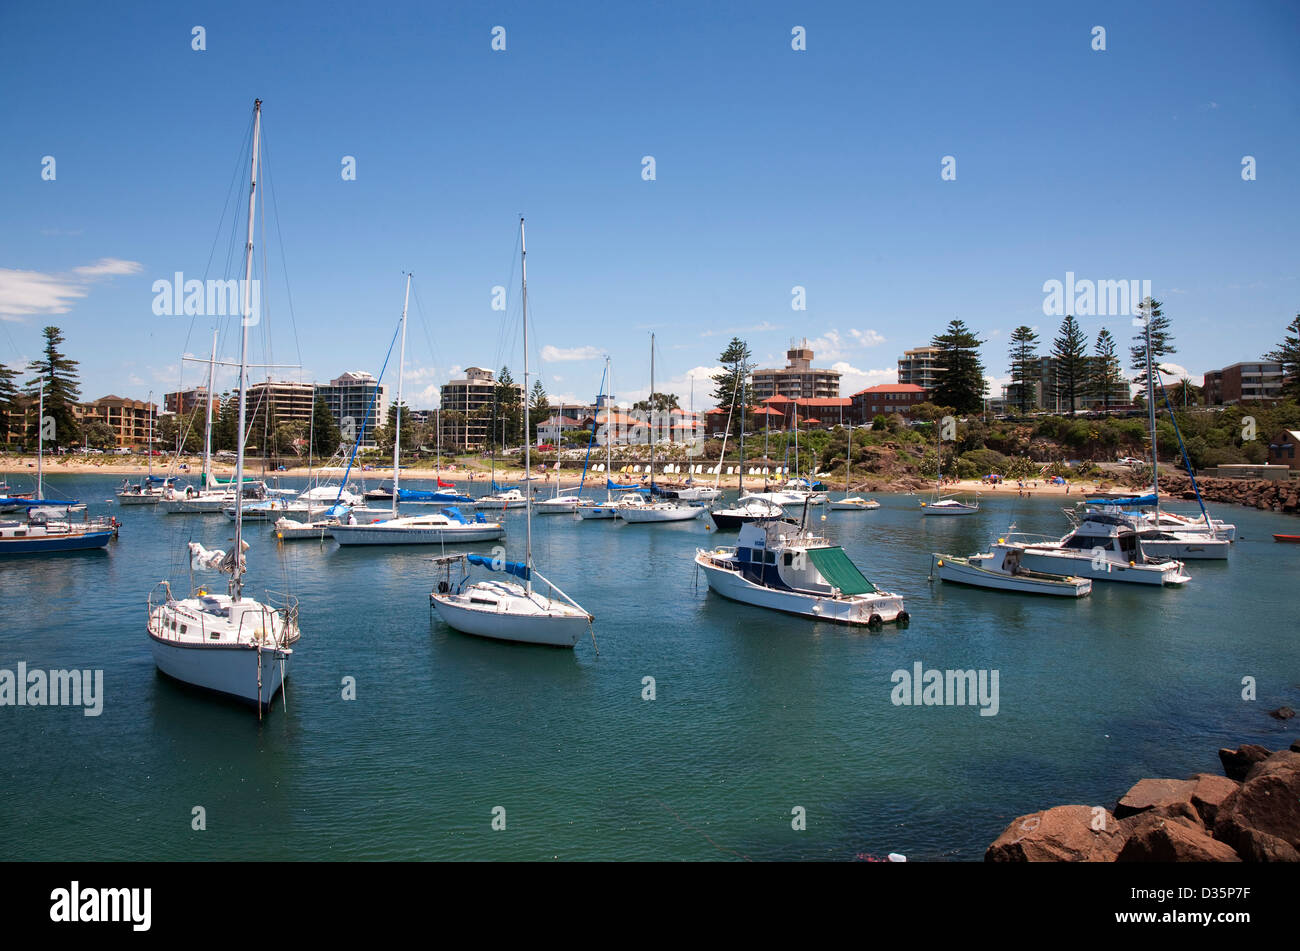 City Beach in Wollongong which is one of Australia's most liveable regional cities located just south of Sydney Stock Photo